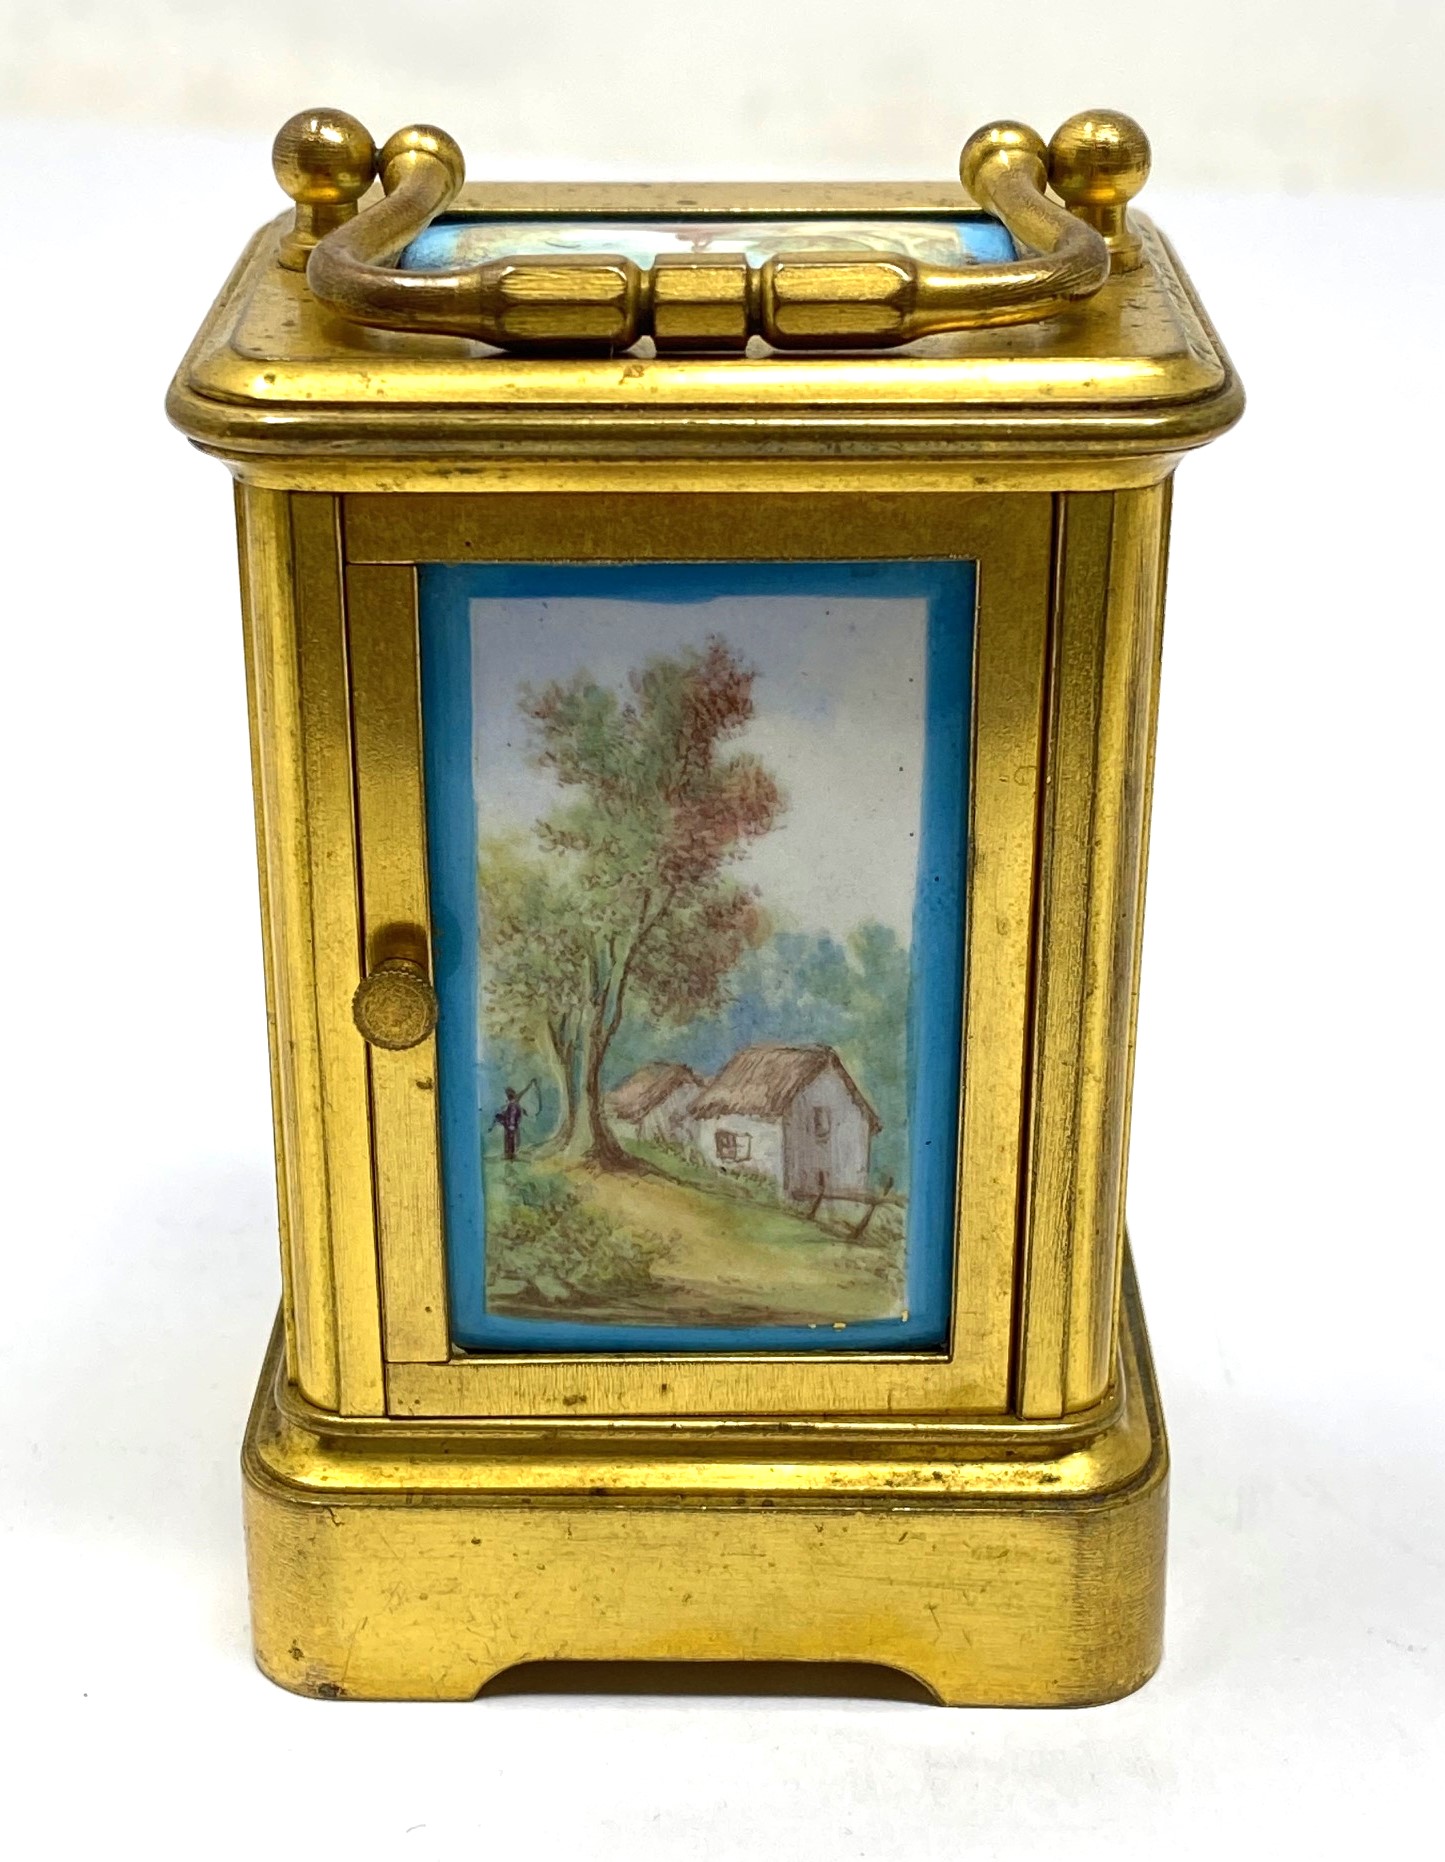 A FRENCH GILT-BRASS AND ENAMEL MINIATURE CARRIAGE CLOCK, PERHAPS J. DEJARDIN, PARIS, FOR RETAIL BY - Image 6 of 8